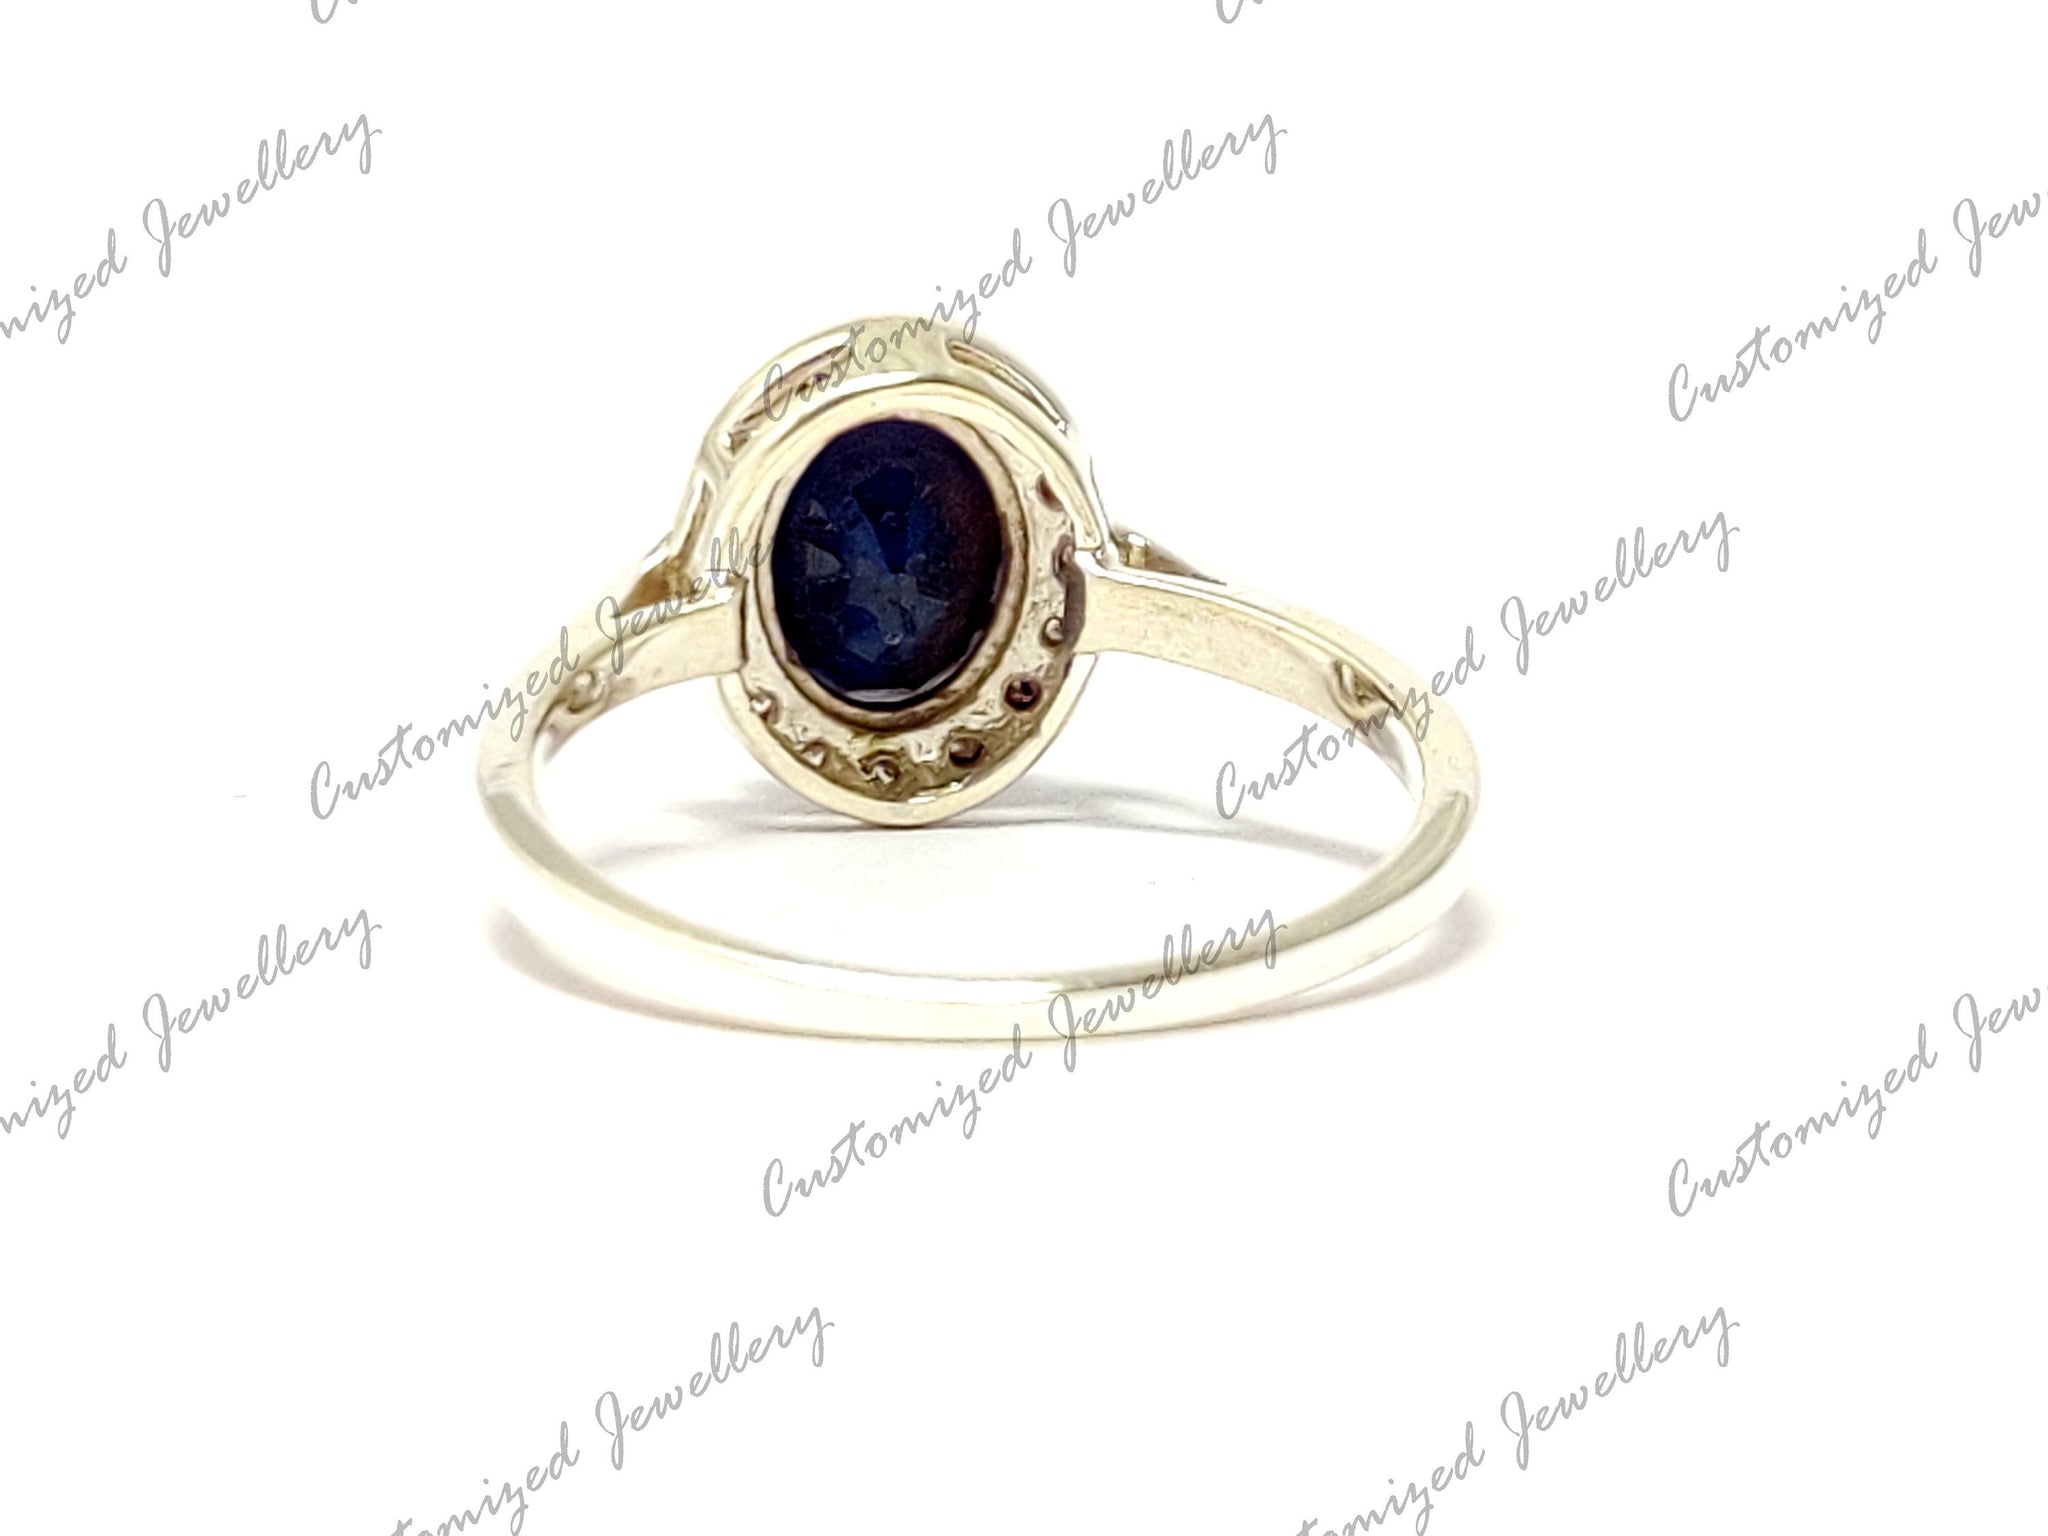 Blue Sapphire Engagement Ring Natural Sapphire Engagement Band 2.5 Ct Sapphire Wedding Ring Blue Sapphire Wedding Solitaire Ring